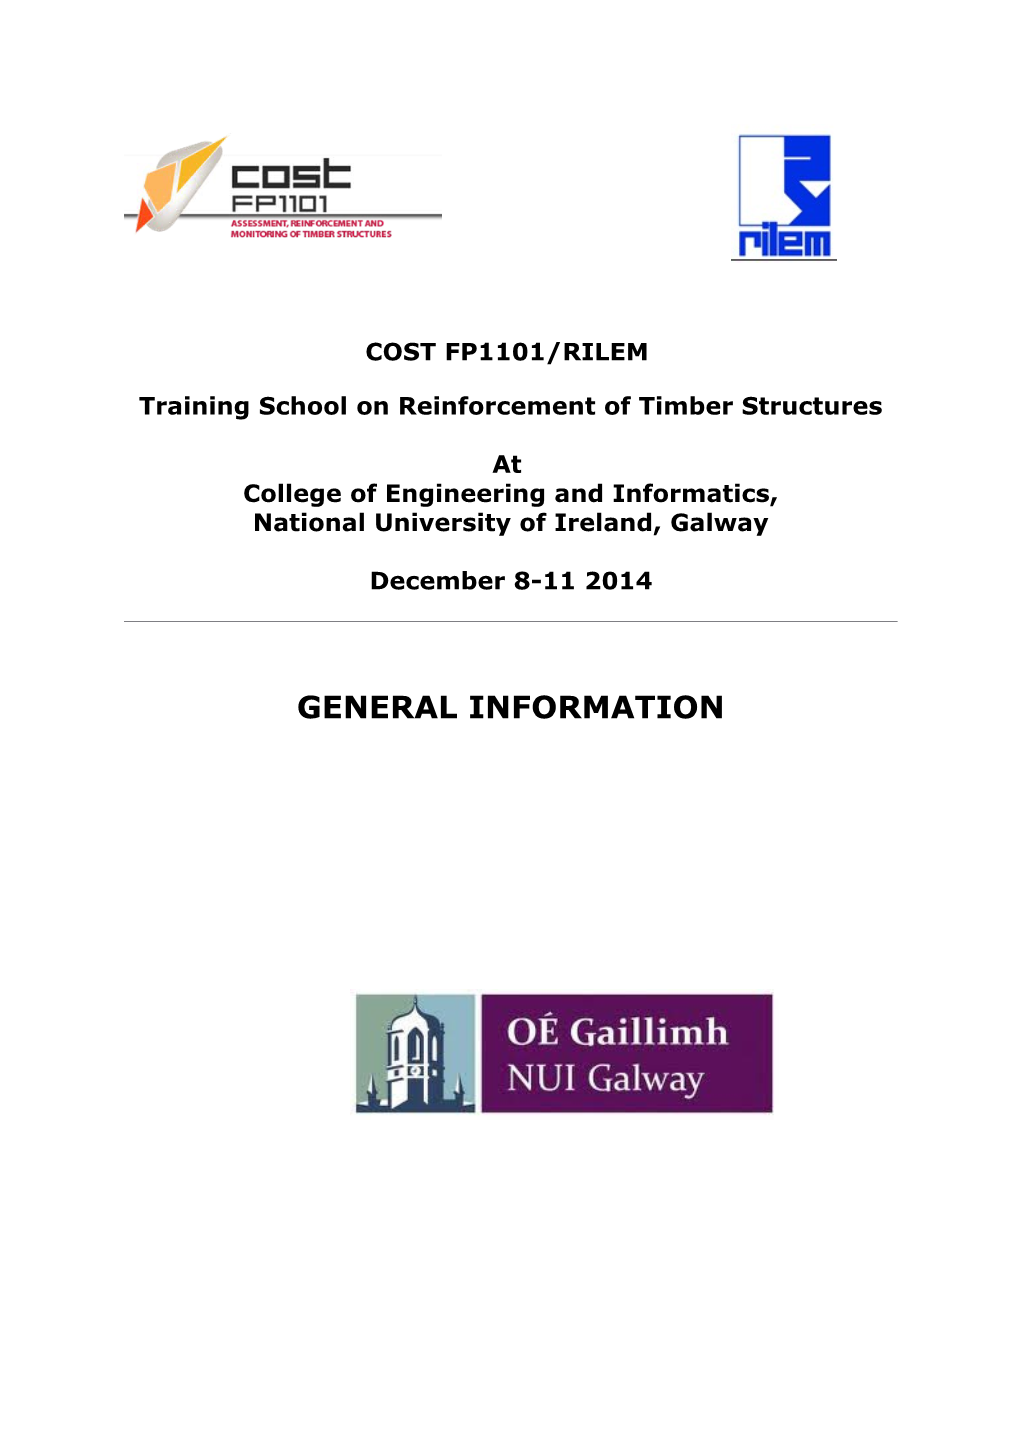 Training School on Reinforcement of Timber Structures